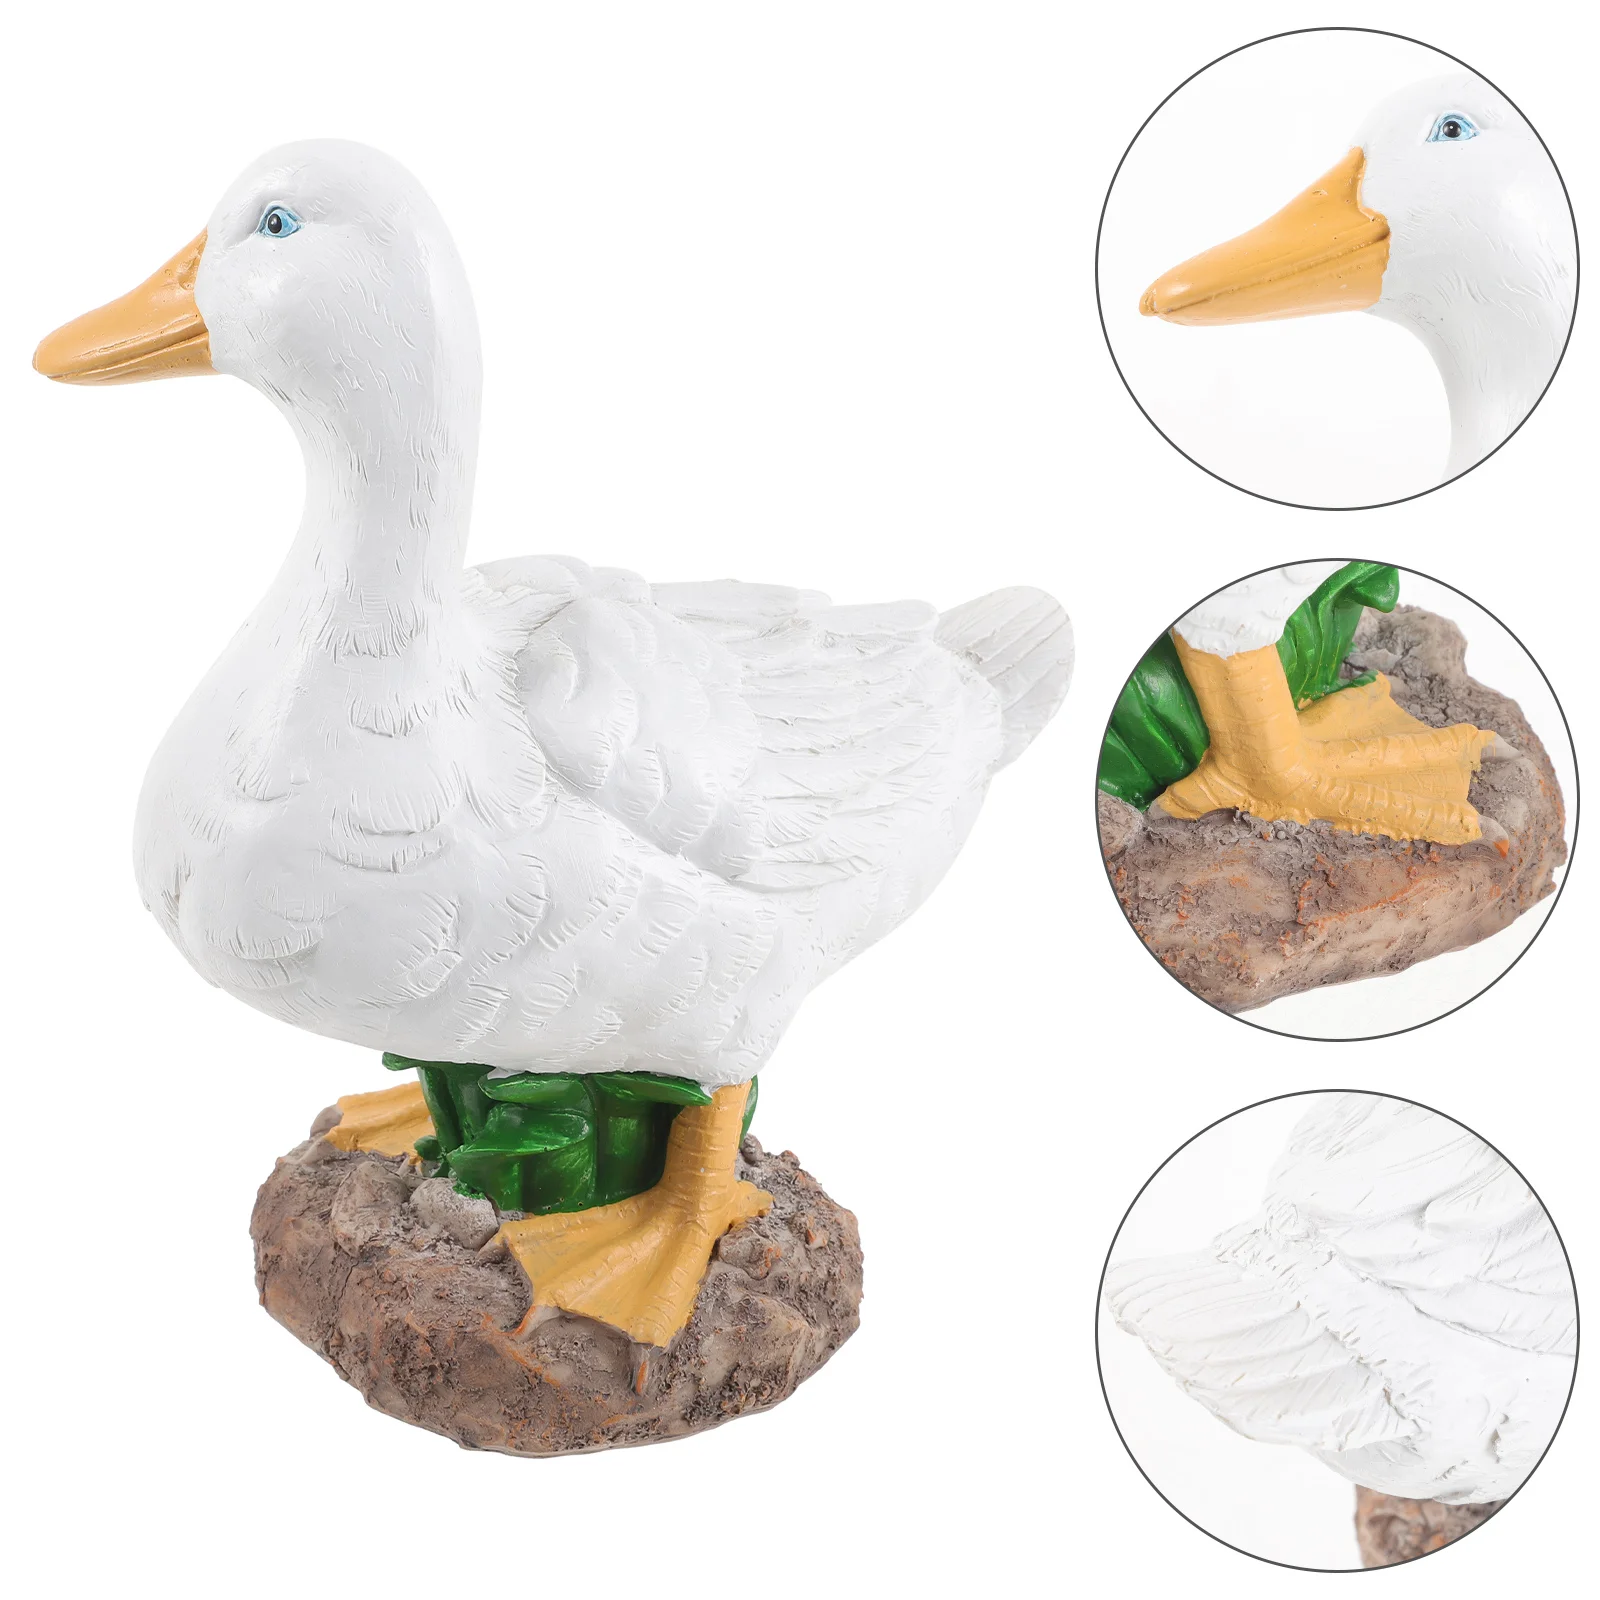 

Decor Realistic Duck Model Animal Simulated Vivid Resin Ornaments Garden Pond Statues Supplies